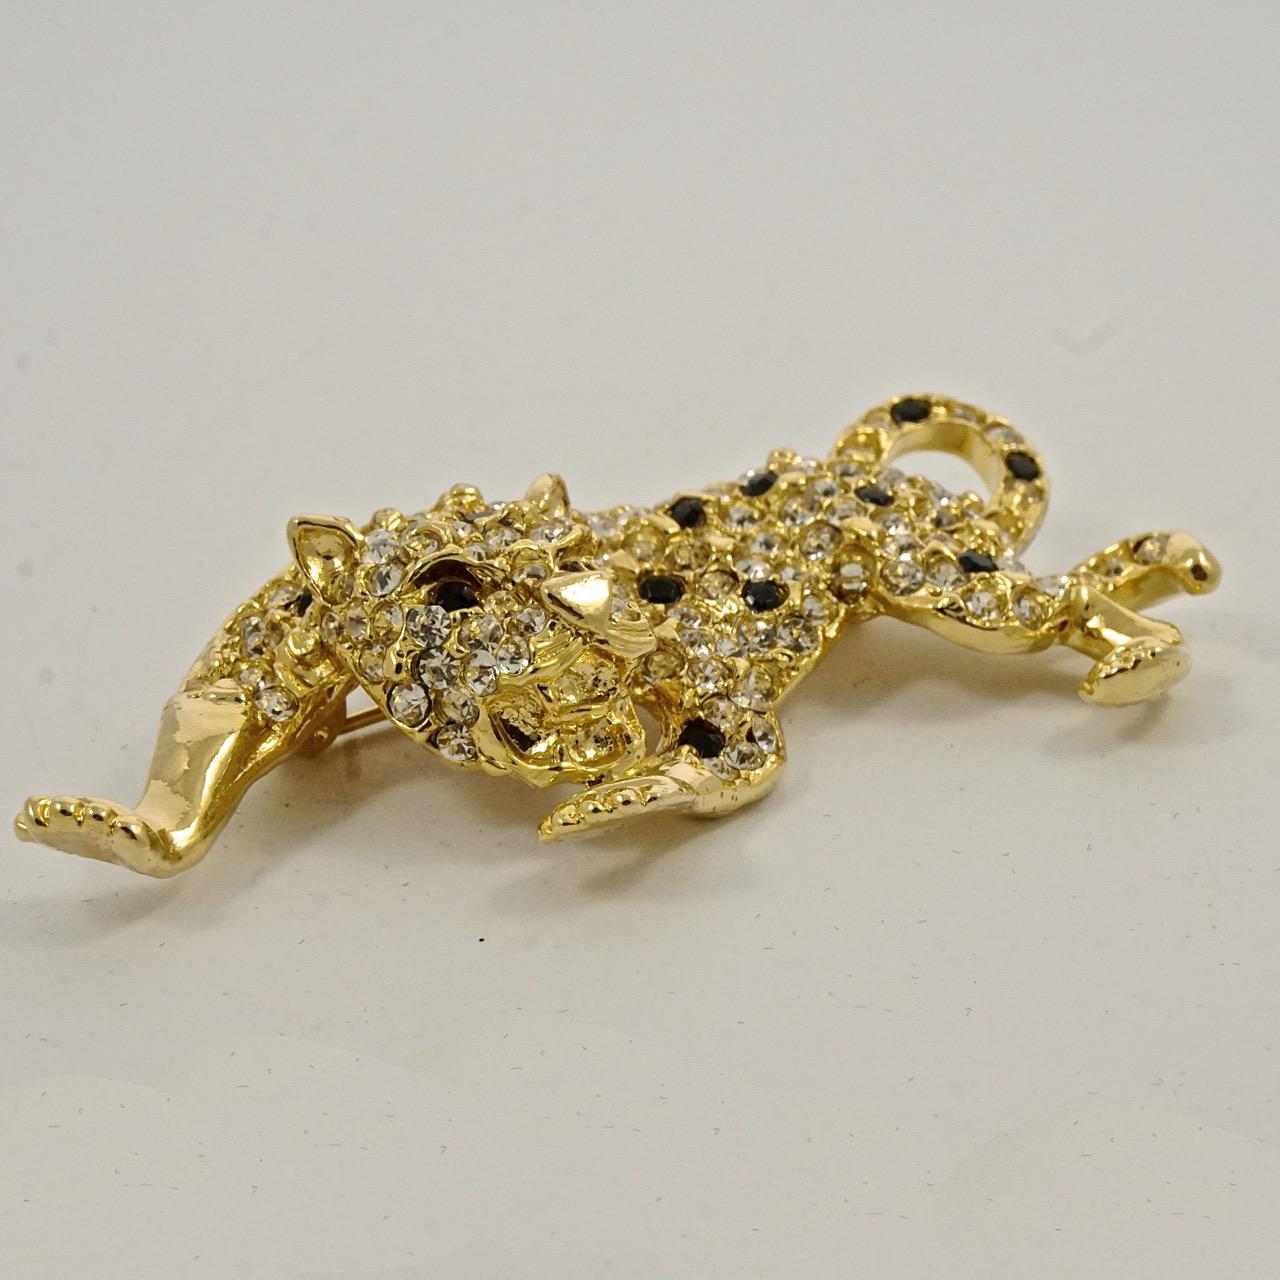 Gold Plated Leopard Brooch with Clear and Black Rhinestones circa 1980s In Excellent Condition For Sale In London, GB